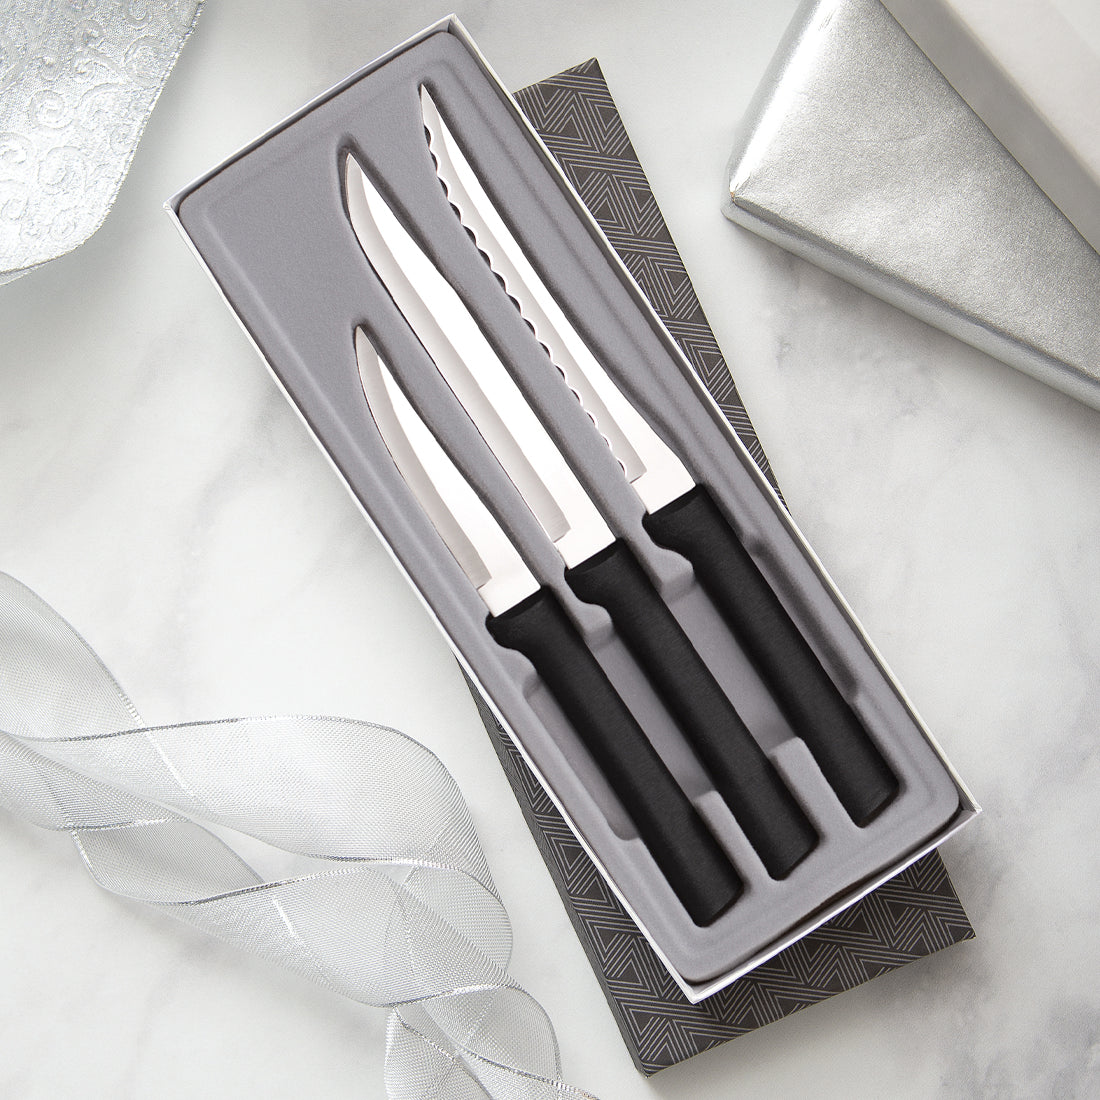 3-piece Cooking Essentials Gift Set with silver handles in a black-lined gift box